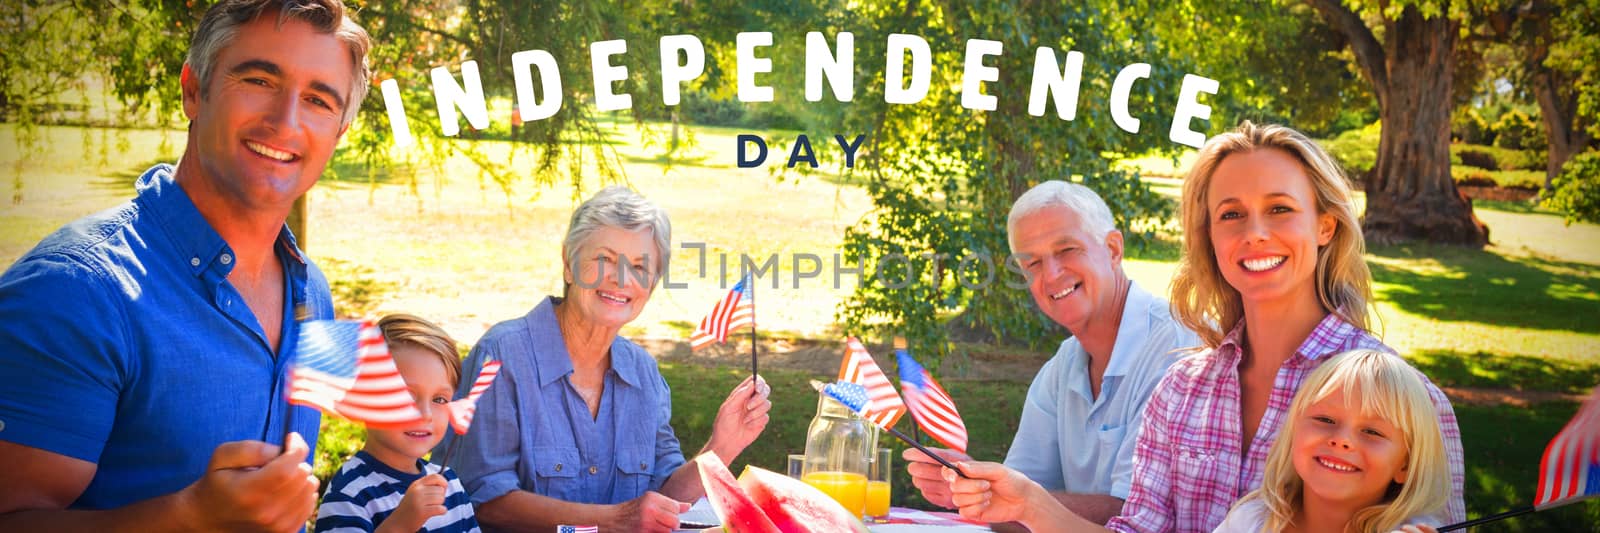 Happy independence day against portrait of family having picnic and holding american flag